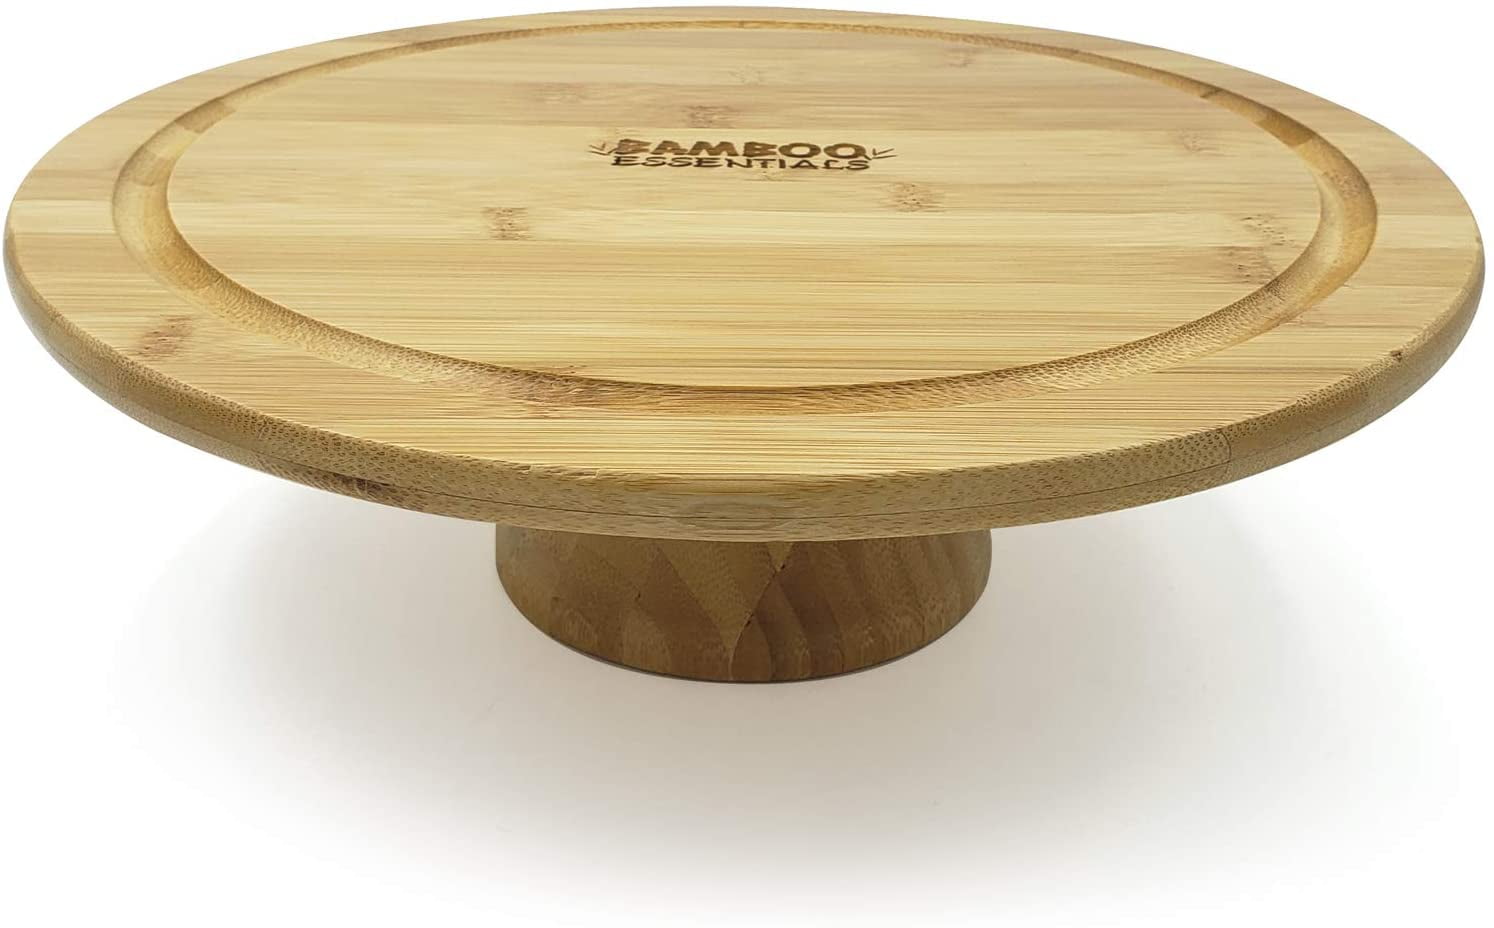 Bamboo Essentials Natural Cake Stand, Cake Stand On ...